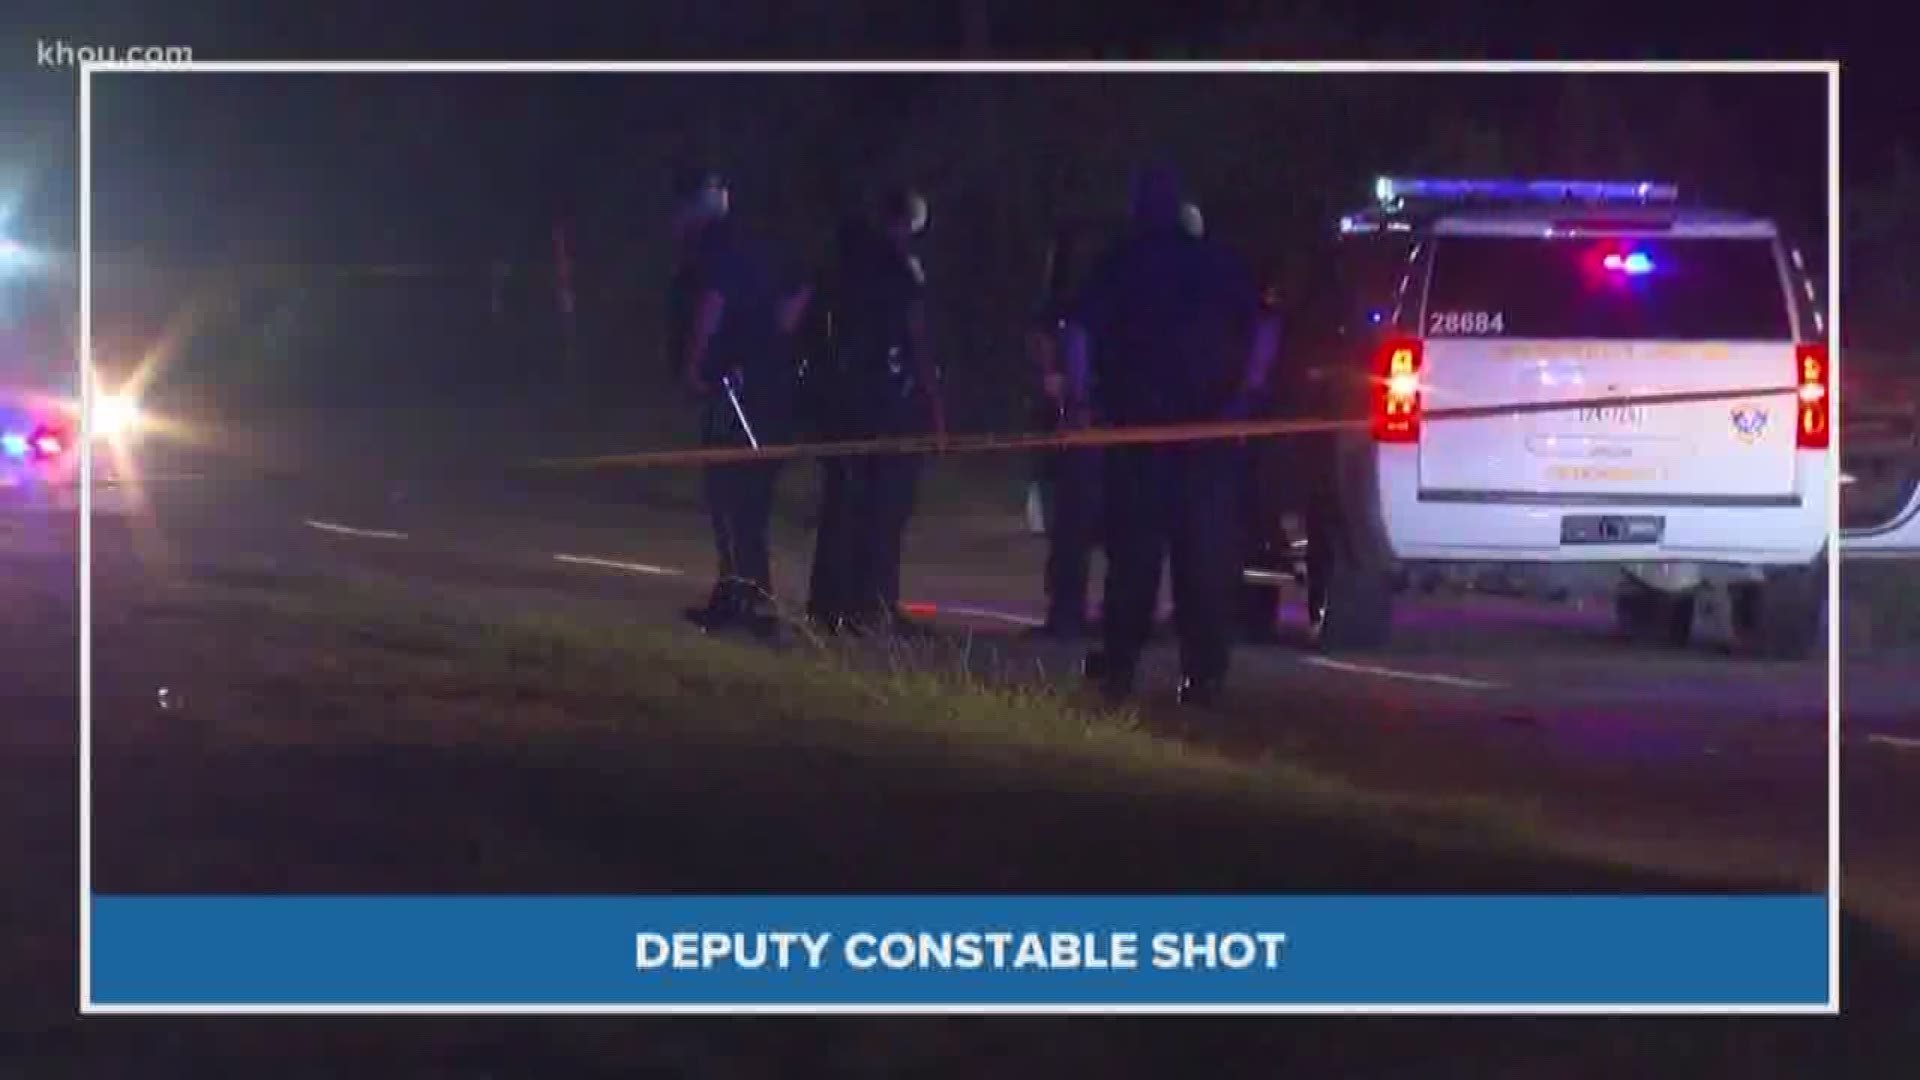 A Harris County Precinct 7 deputy is shot overnight, reporter Matt Dougherty reunites a dog with his family and the Astros win, these are some of the top headlines from #HTownRush at 4:30 a.m.